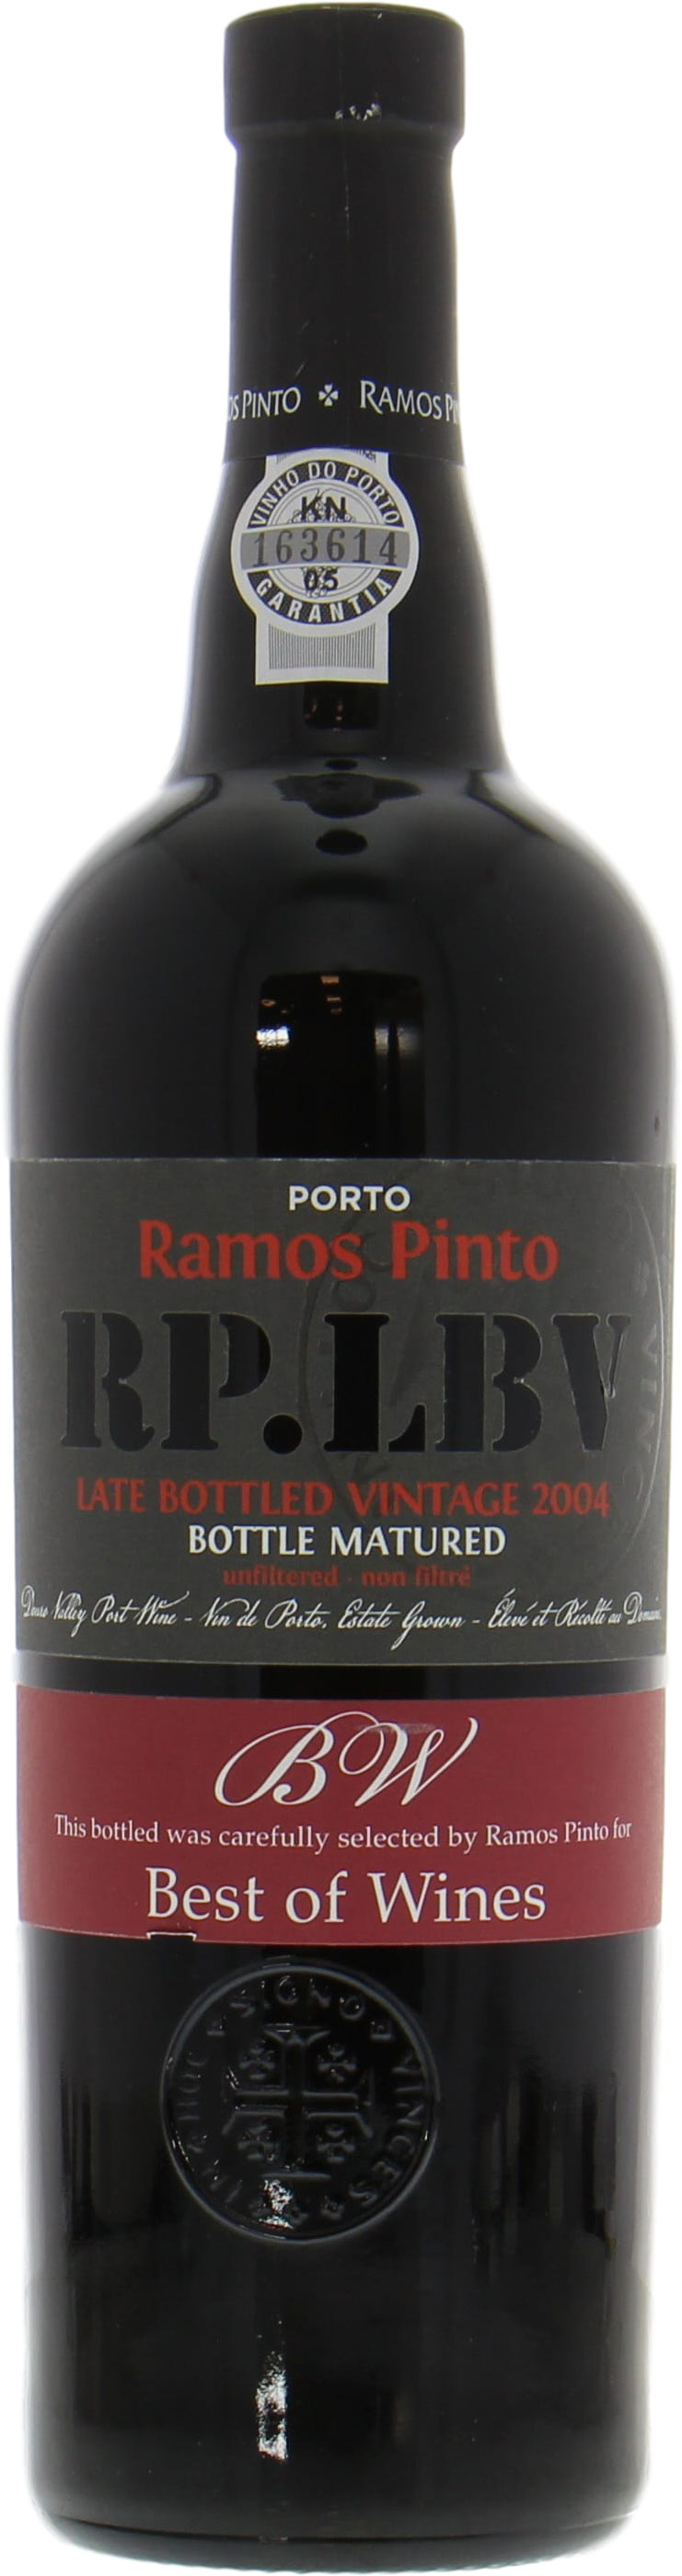 Ramos Pinto - Late Bottled Vintage Port Bottle matured 2004 Perfect